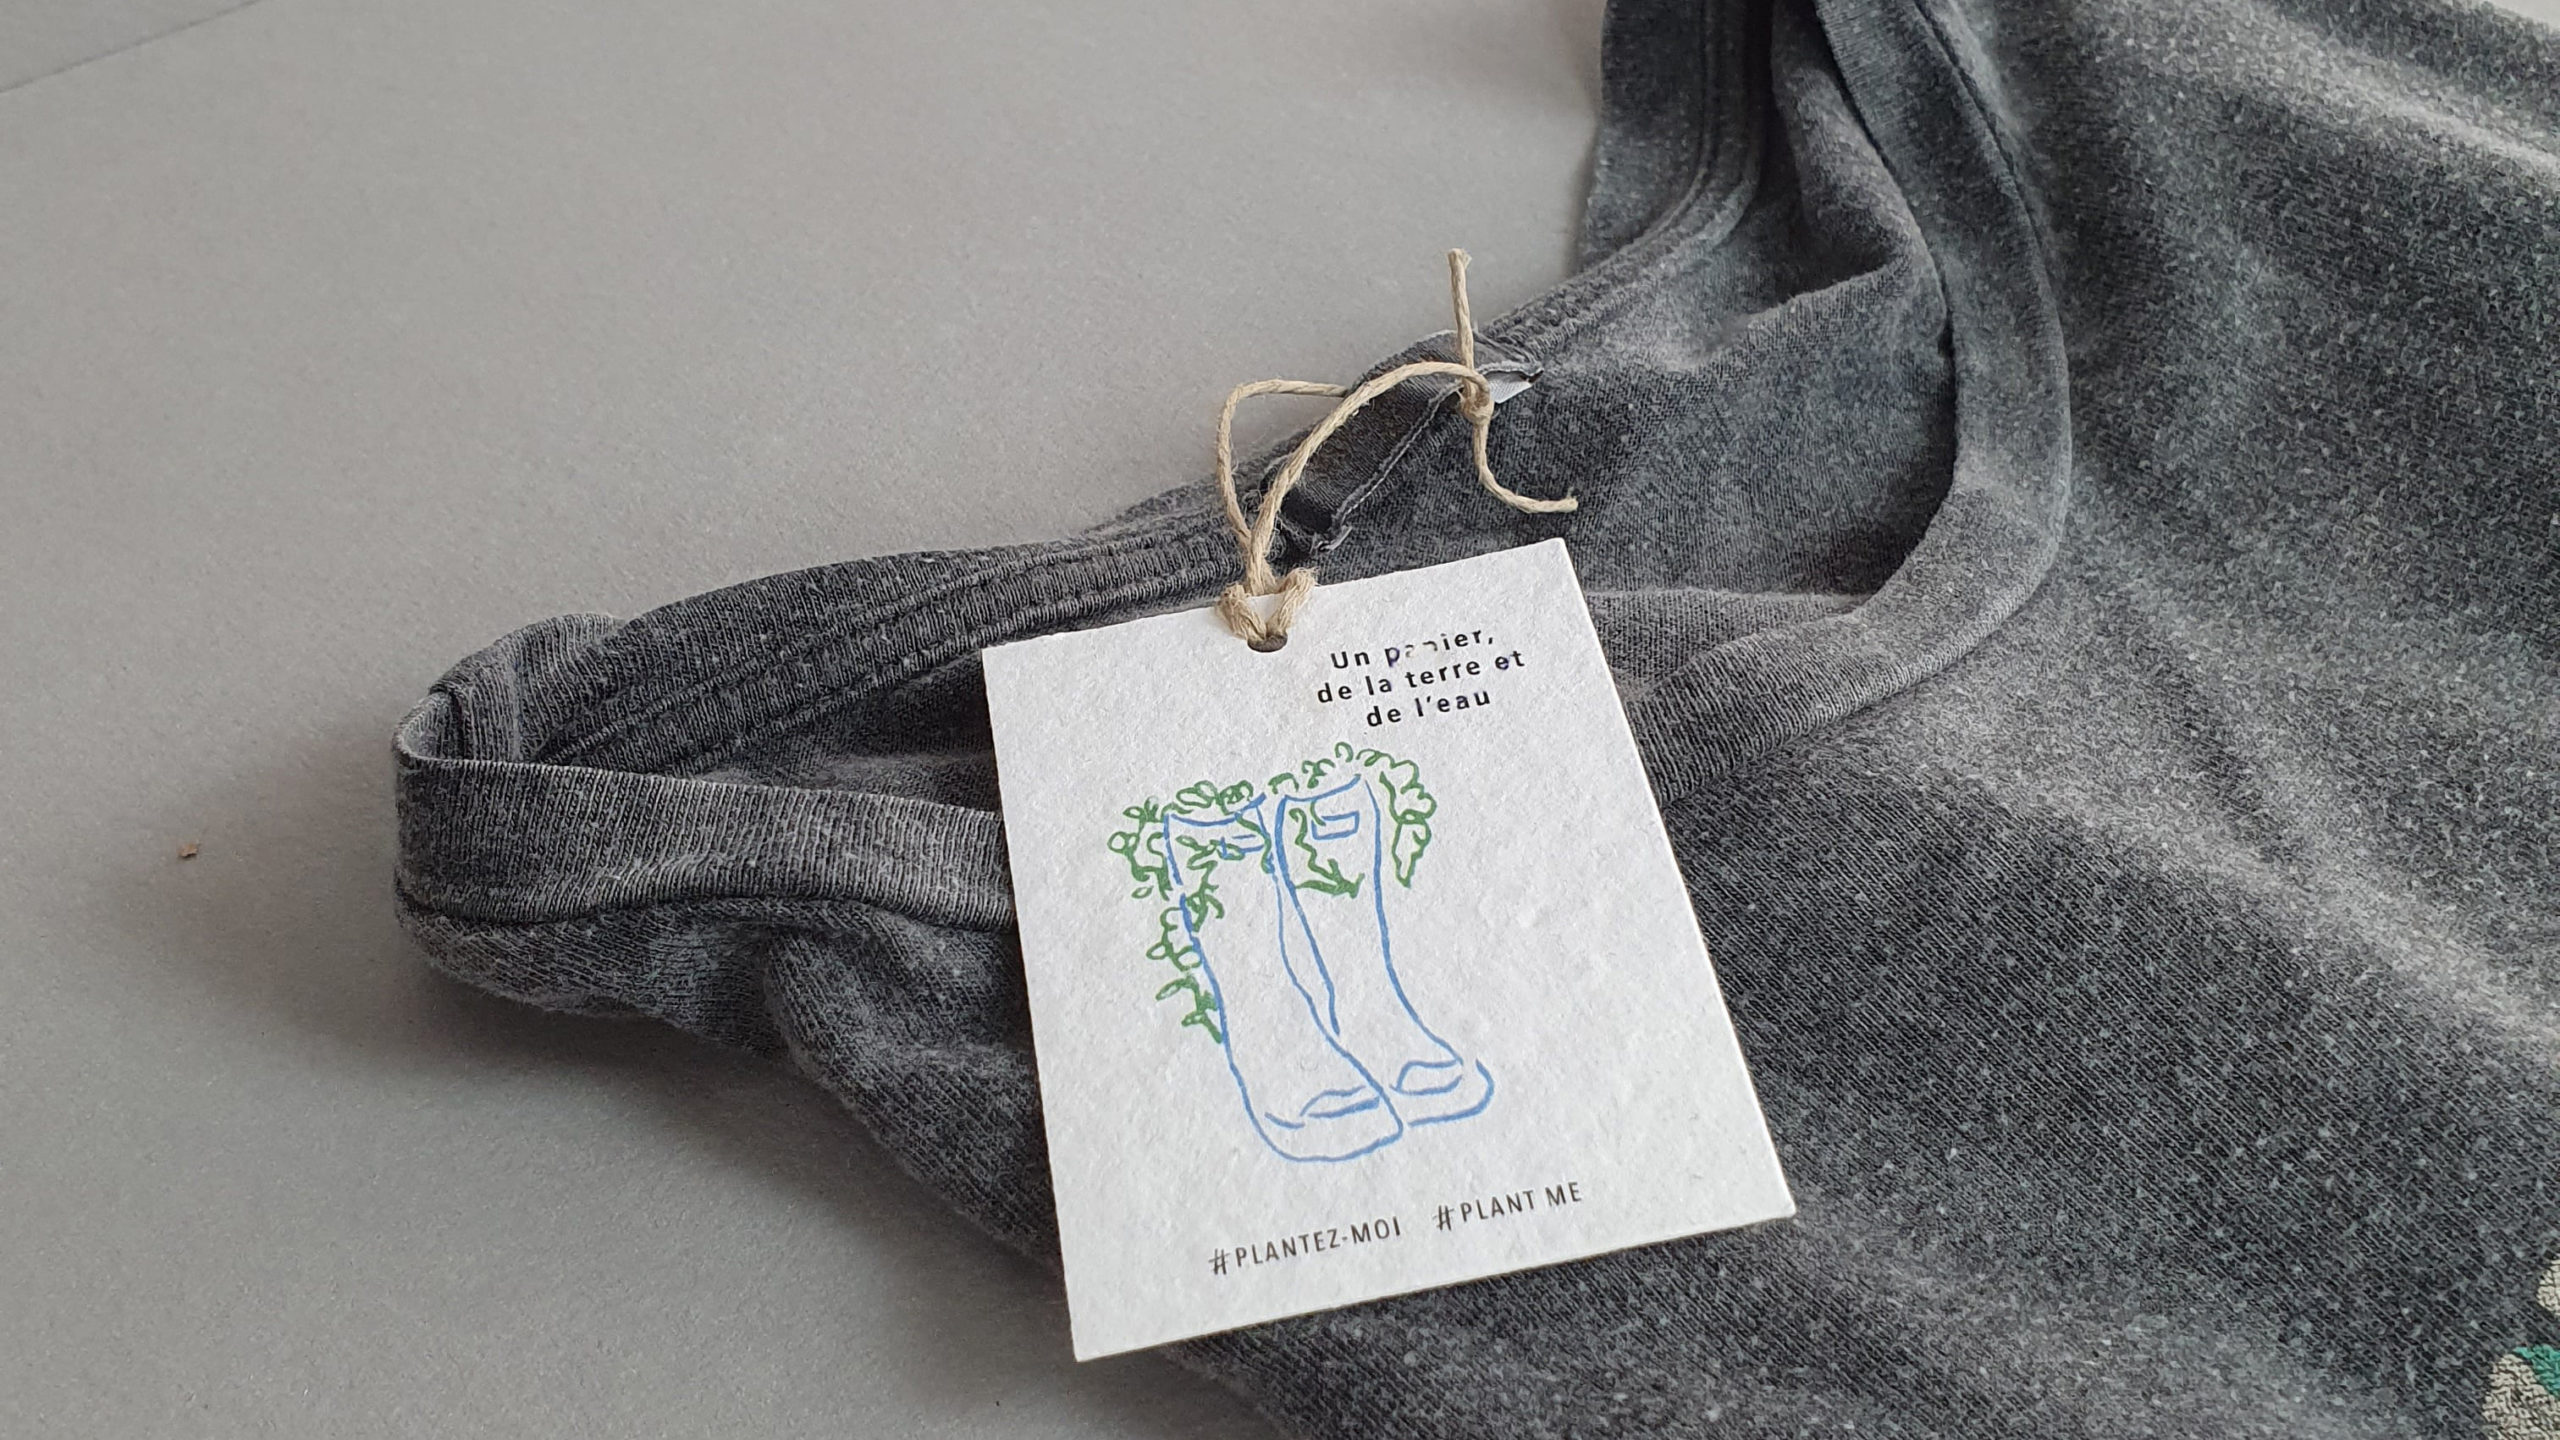 Sheedo Studio are the innovators behind clothing labels you can plant